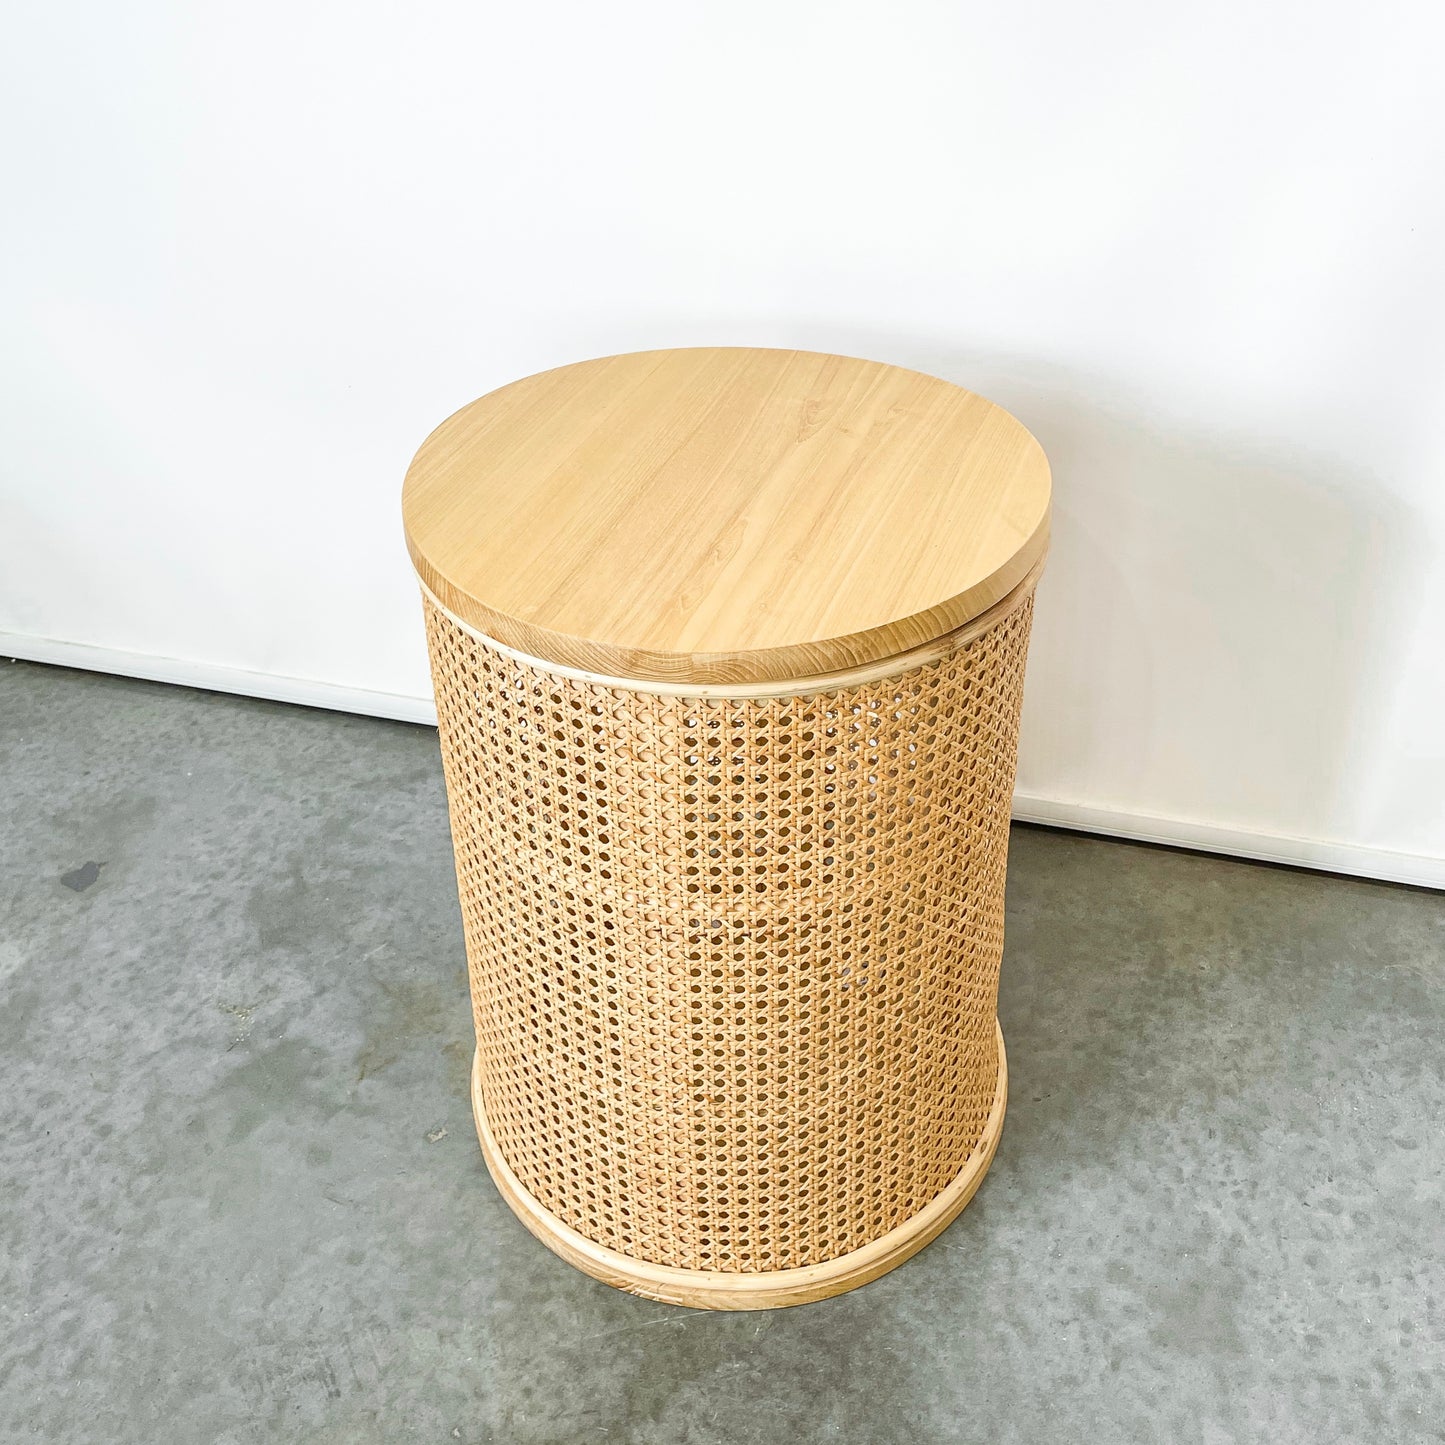 The Siena Side Table